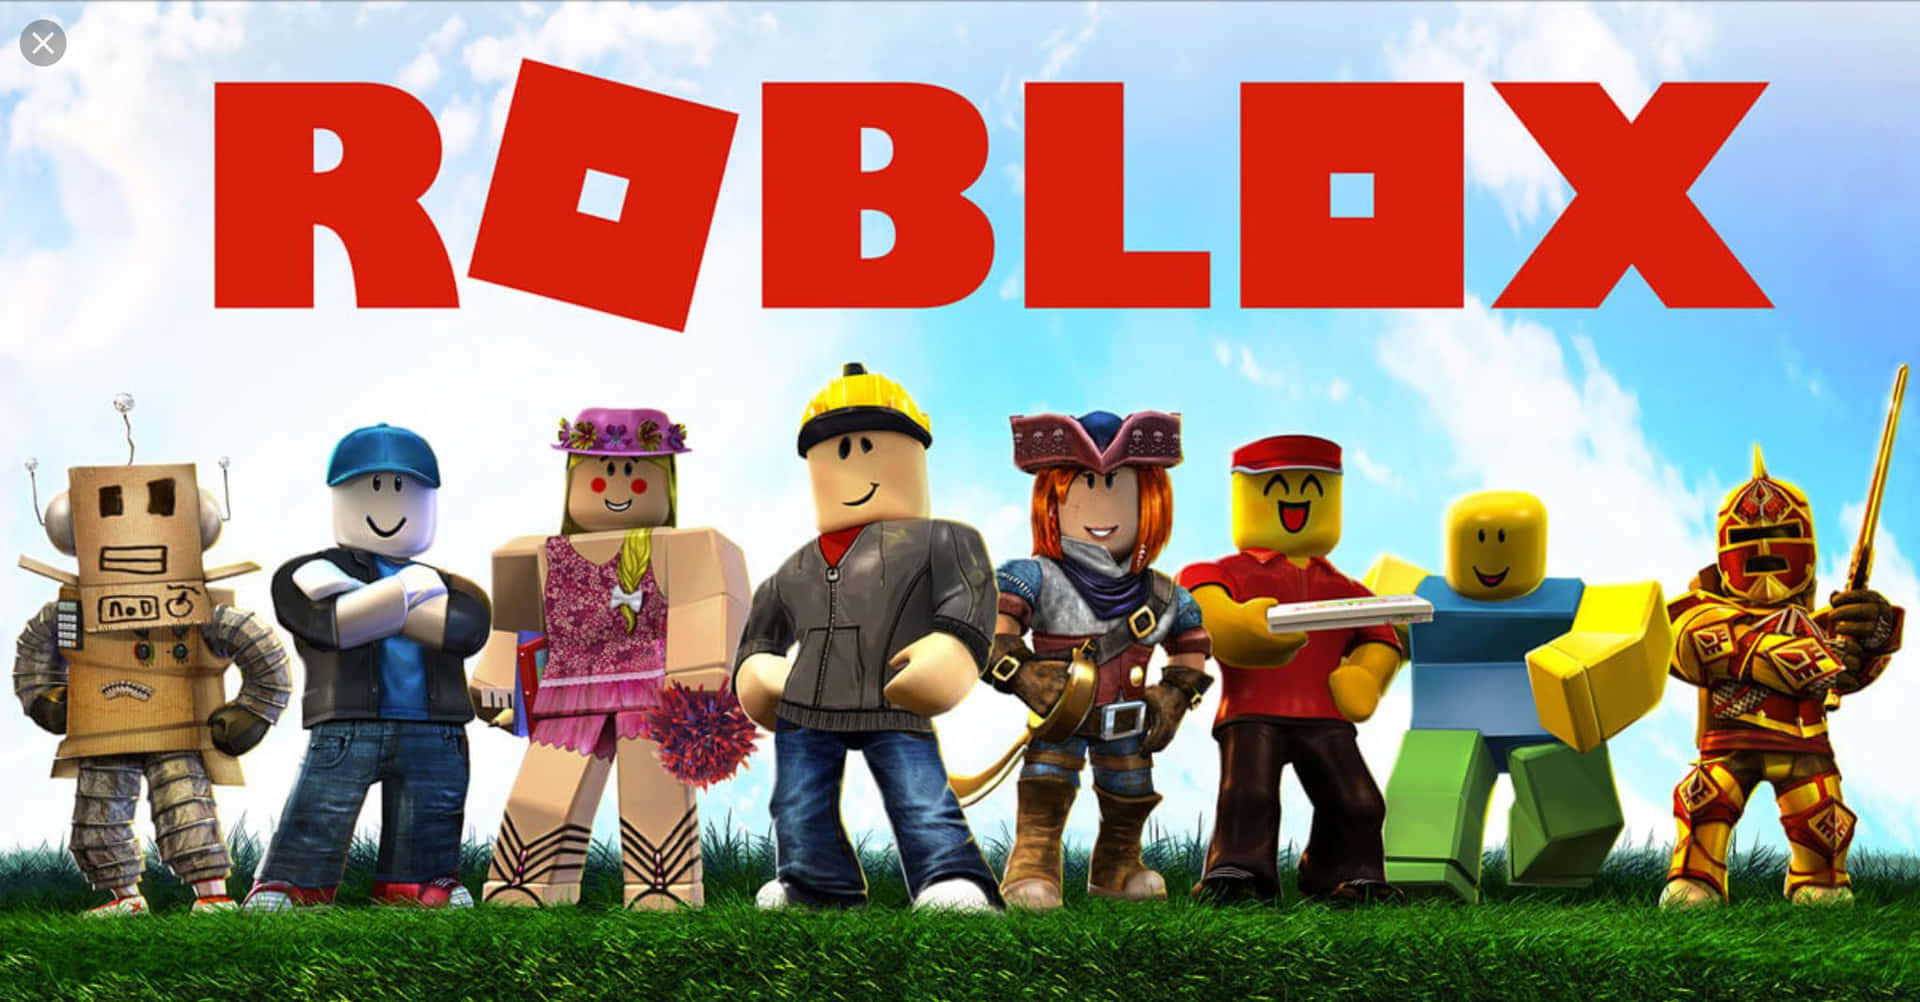 Play a fun and creative game with Cute Roblox!